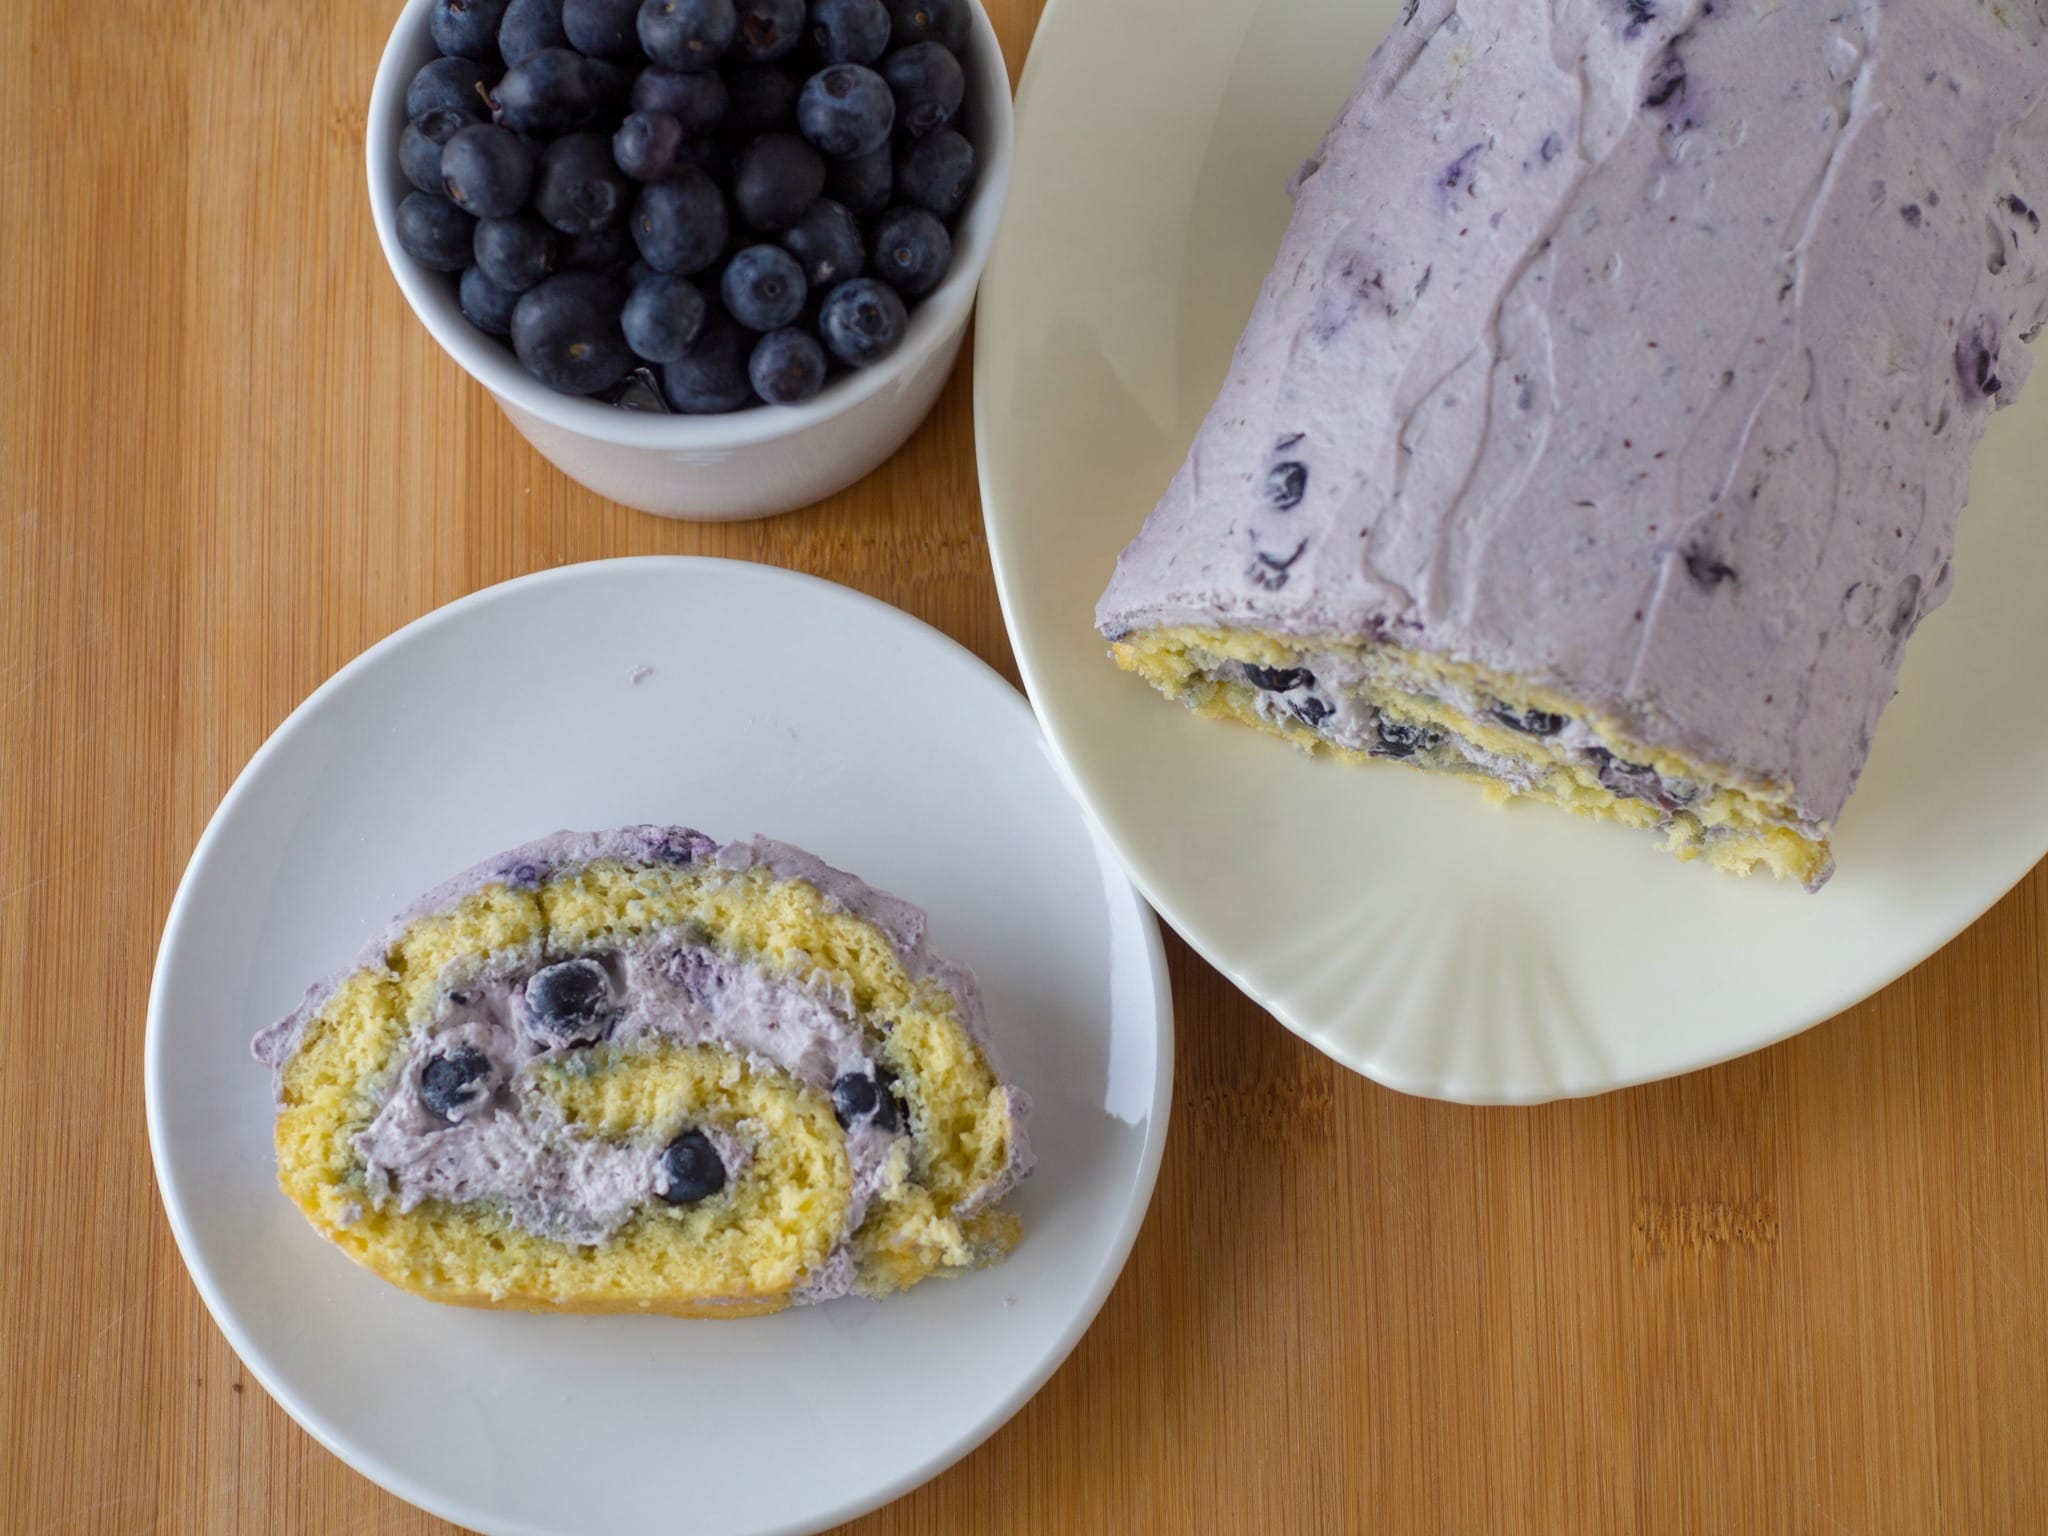 This Blueberry Swiss Roll Cake combines a springy sponge cake rolled up with whipped cream and blueberries. The easy dessert is a delicious way to use blueberries and makes a pretty homemade dessert for the holidays.